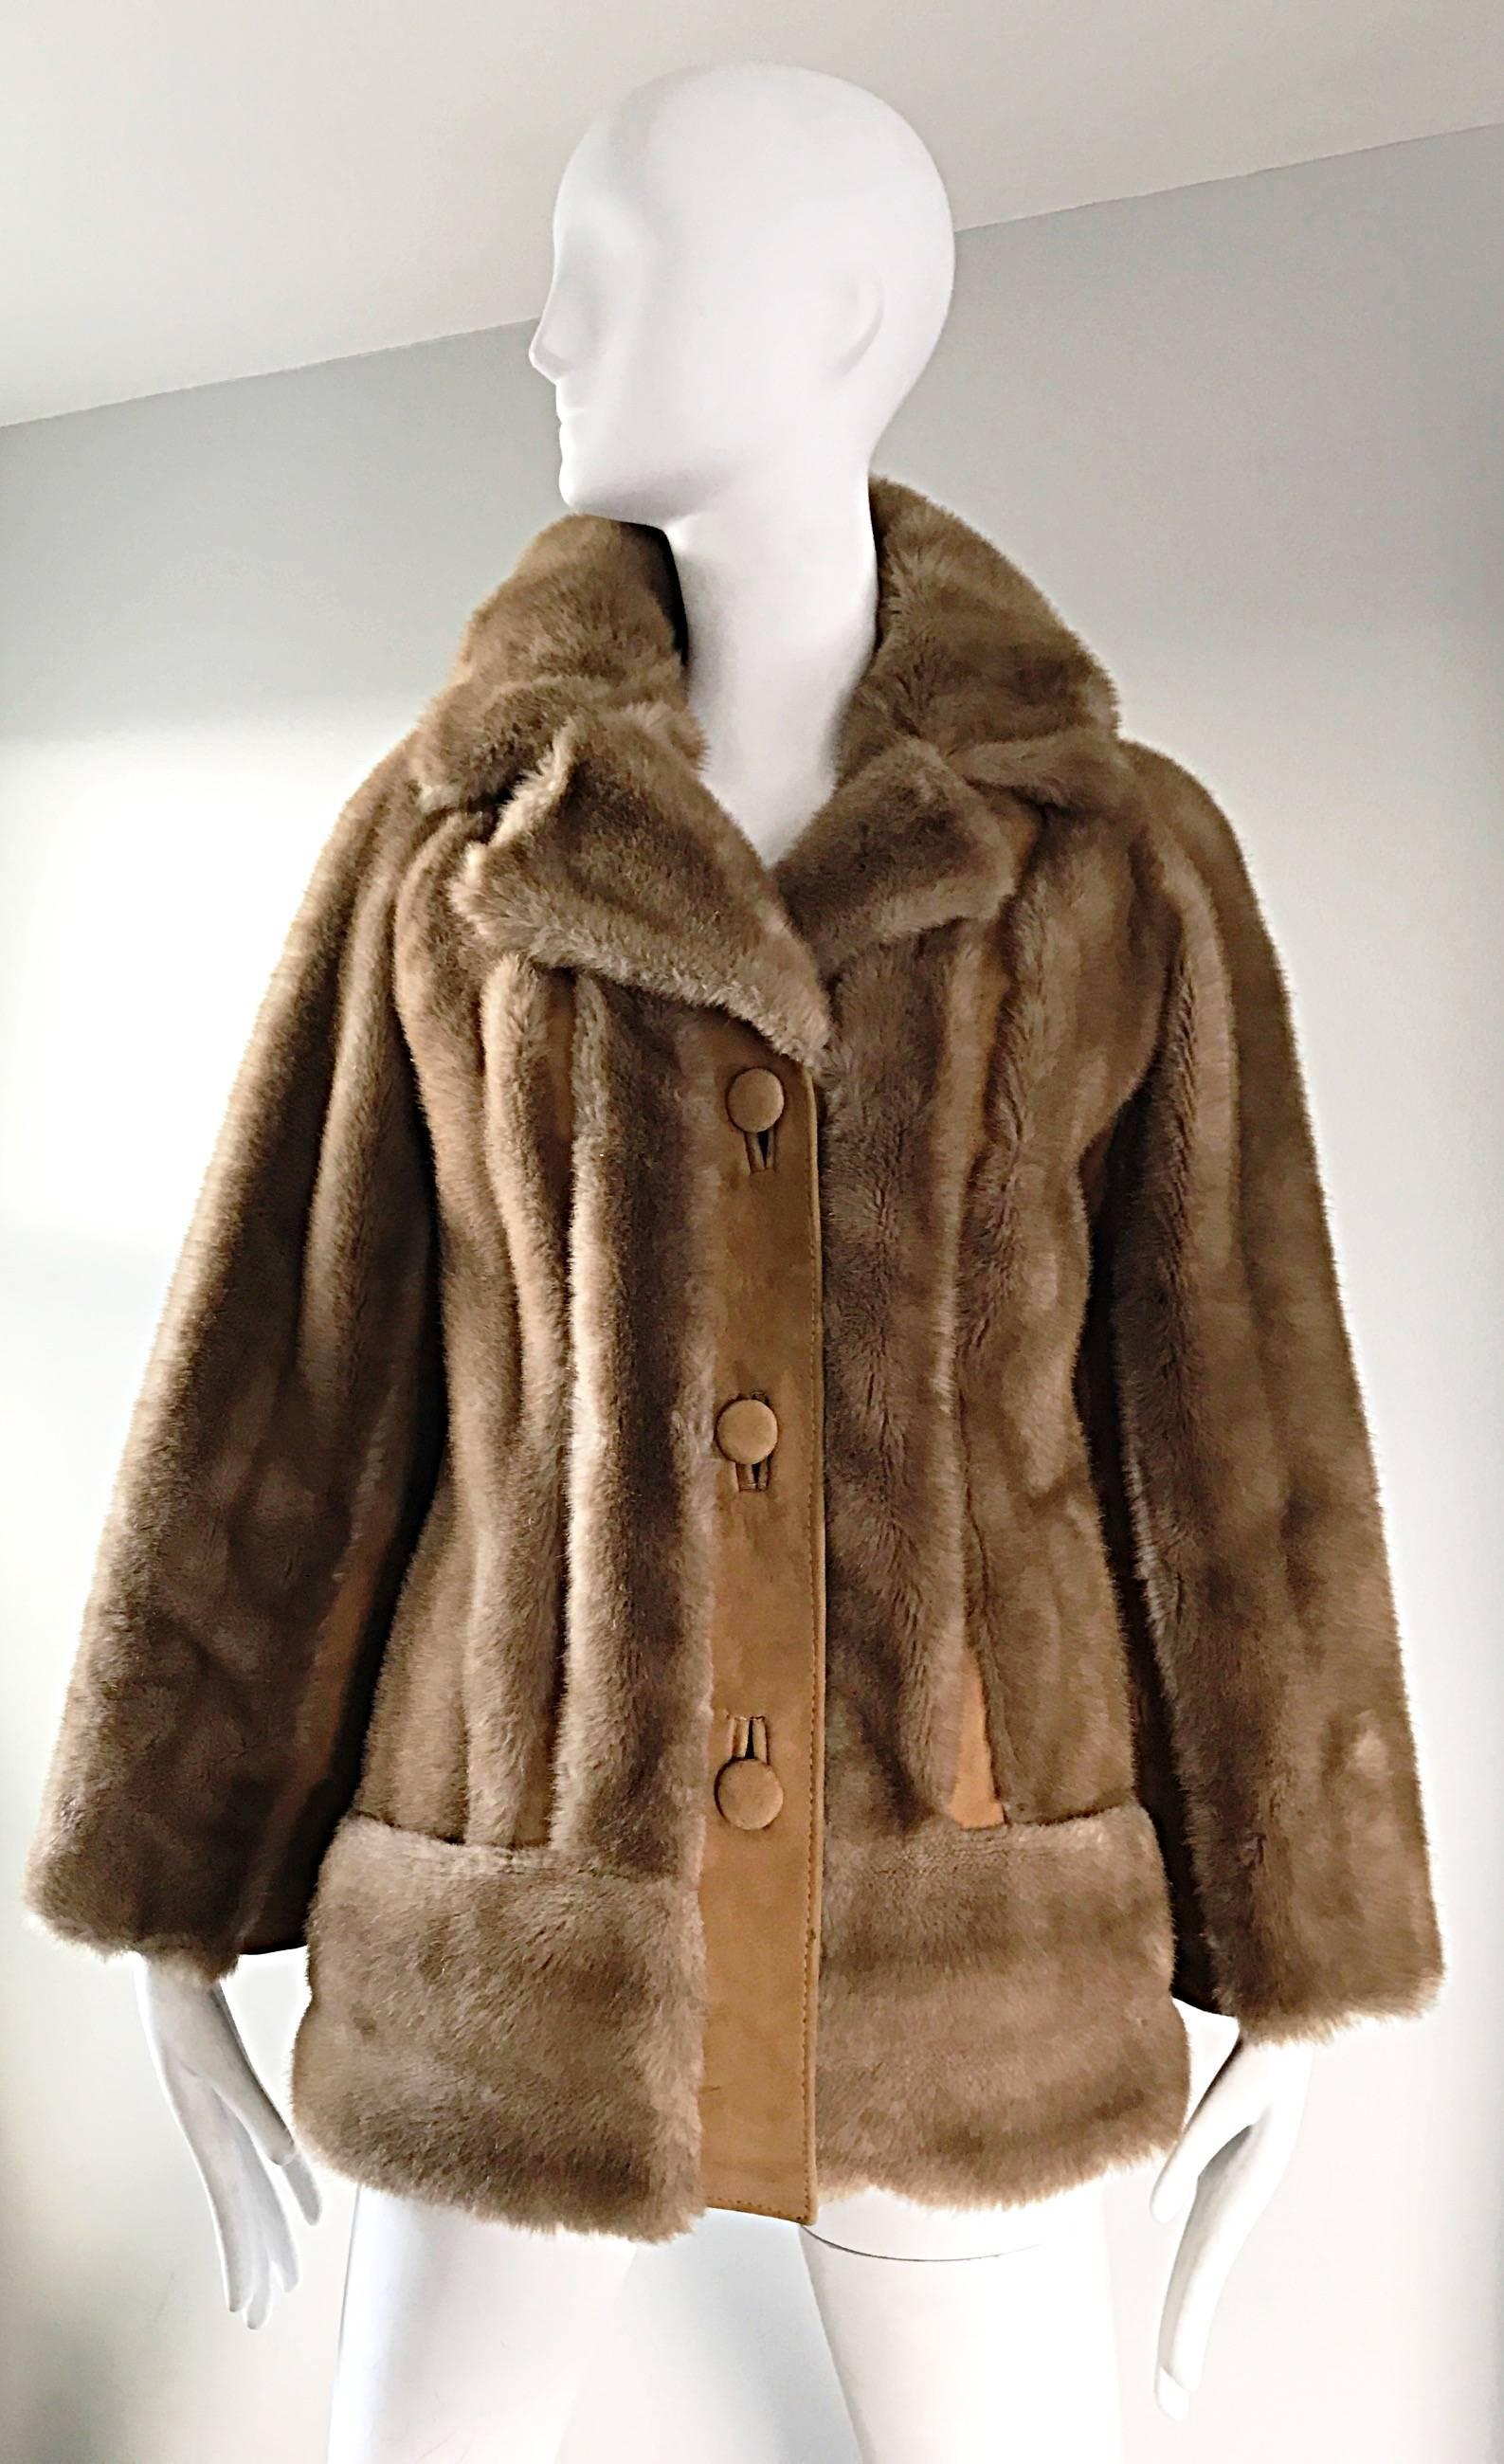 Chic 1960s vintage LILLI ANN for London Leathers faux fur and suede leather swing jacket / coat! Features vertical panels of soft light brown faux fur and suede throughout. Suede covered buttons up the front. Two pockets (one at each side of the